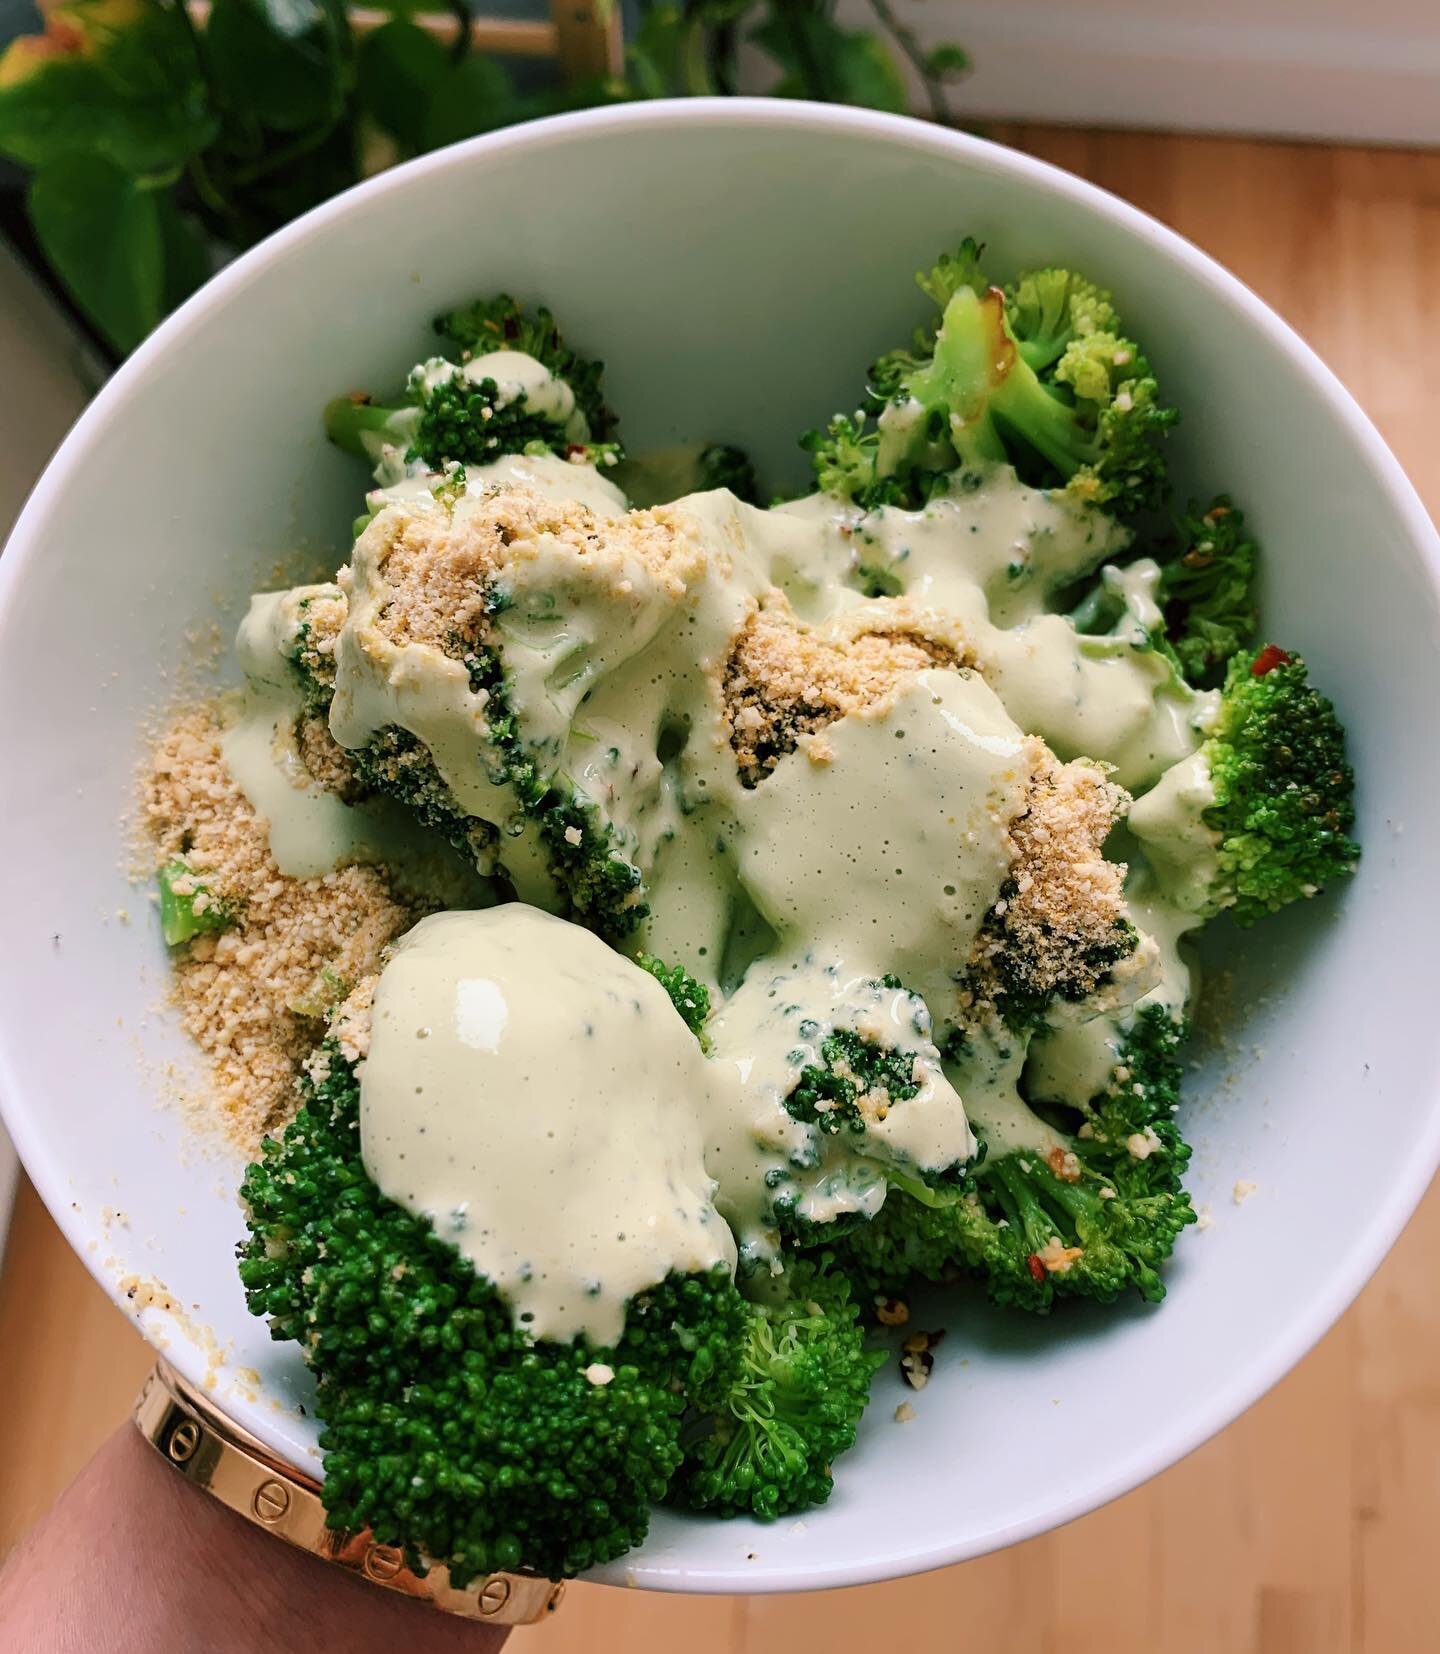 If you need to level up your veggie game, try adding in this sauce. It&rsquo;s SO good and I&rsquo;ve been putting it on everything lately. 
.
.
In a blender mix 1 handful of cashews, 3/4 cup unsweetened almond milk, lime juice from two limes, a hand